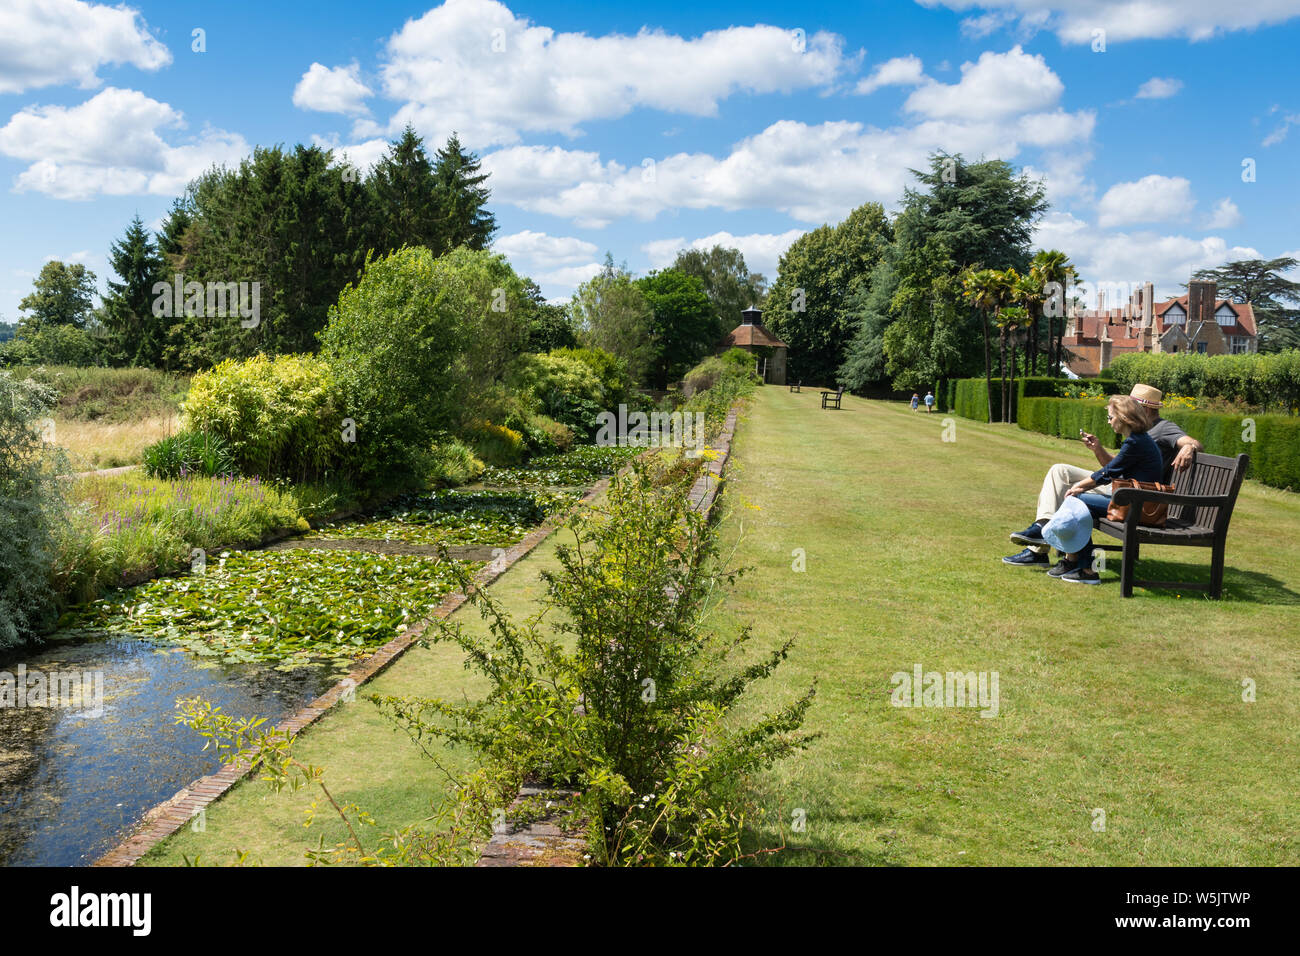 Visitors overlooking the moat and enjoying the gardens at Loseley Park, Surrey, UK, during summer Stock Photo